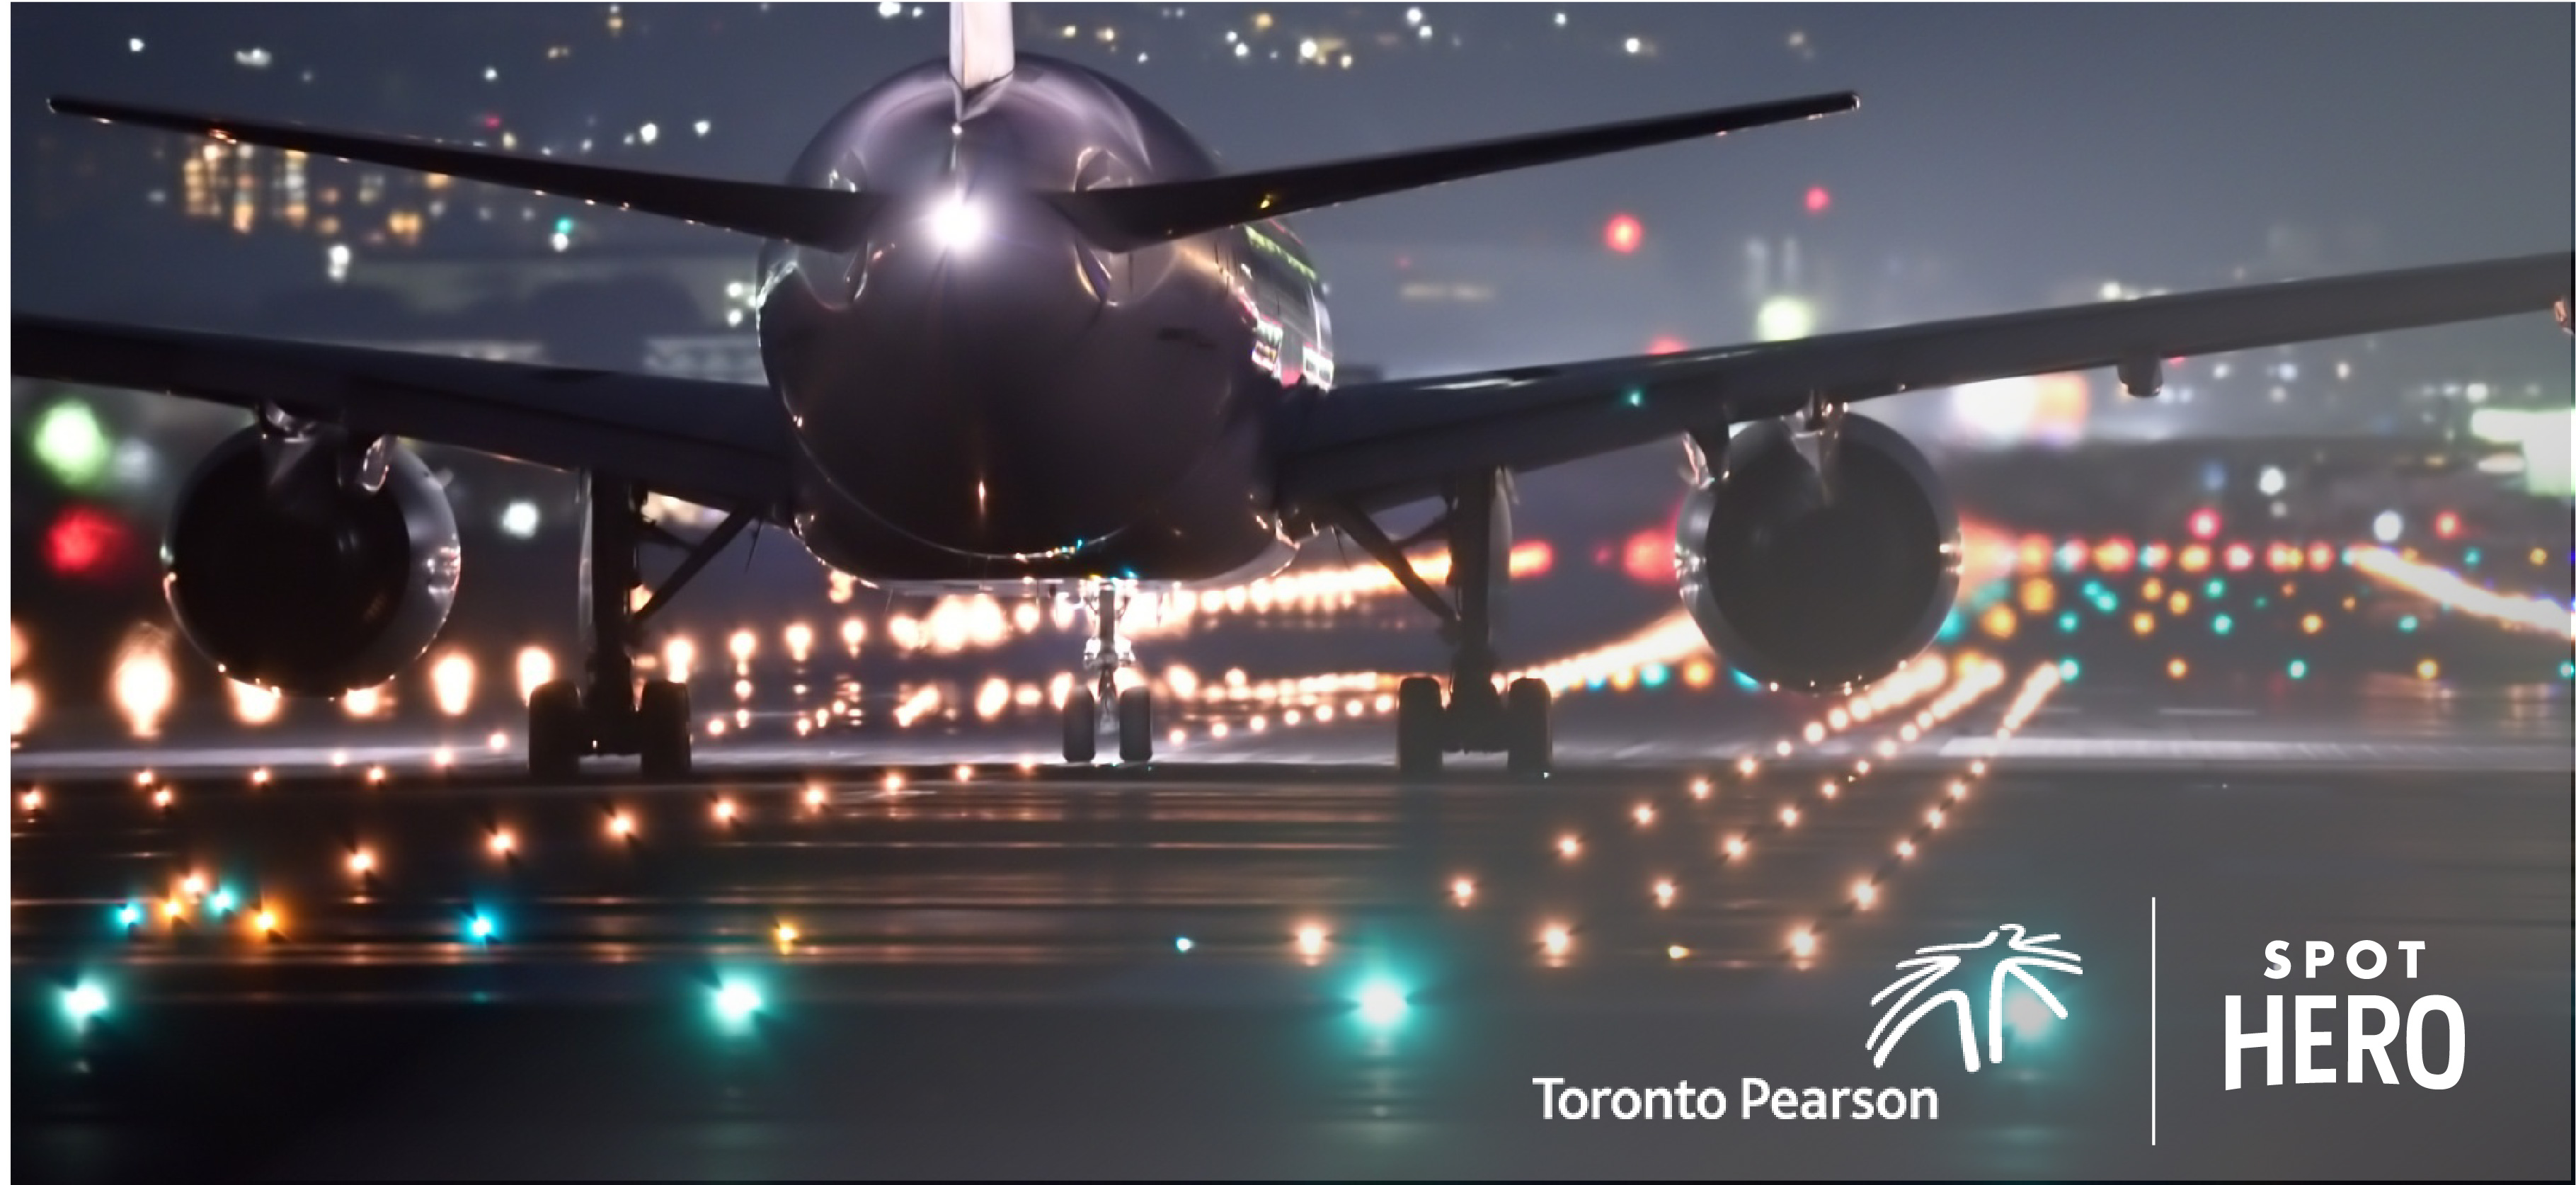 Toronto Pearson Adds SpotHero Online Parking Reservations for a Better Travel Day Experience